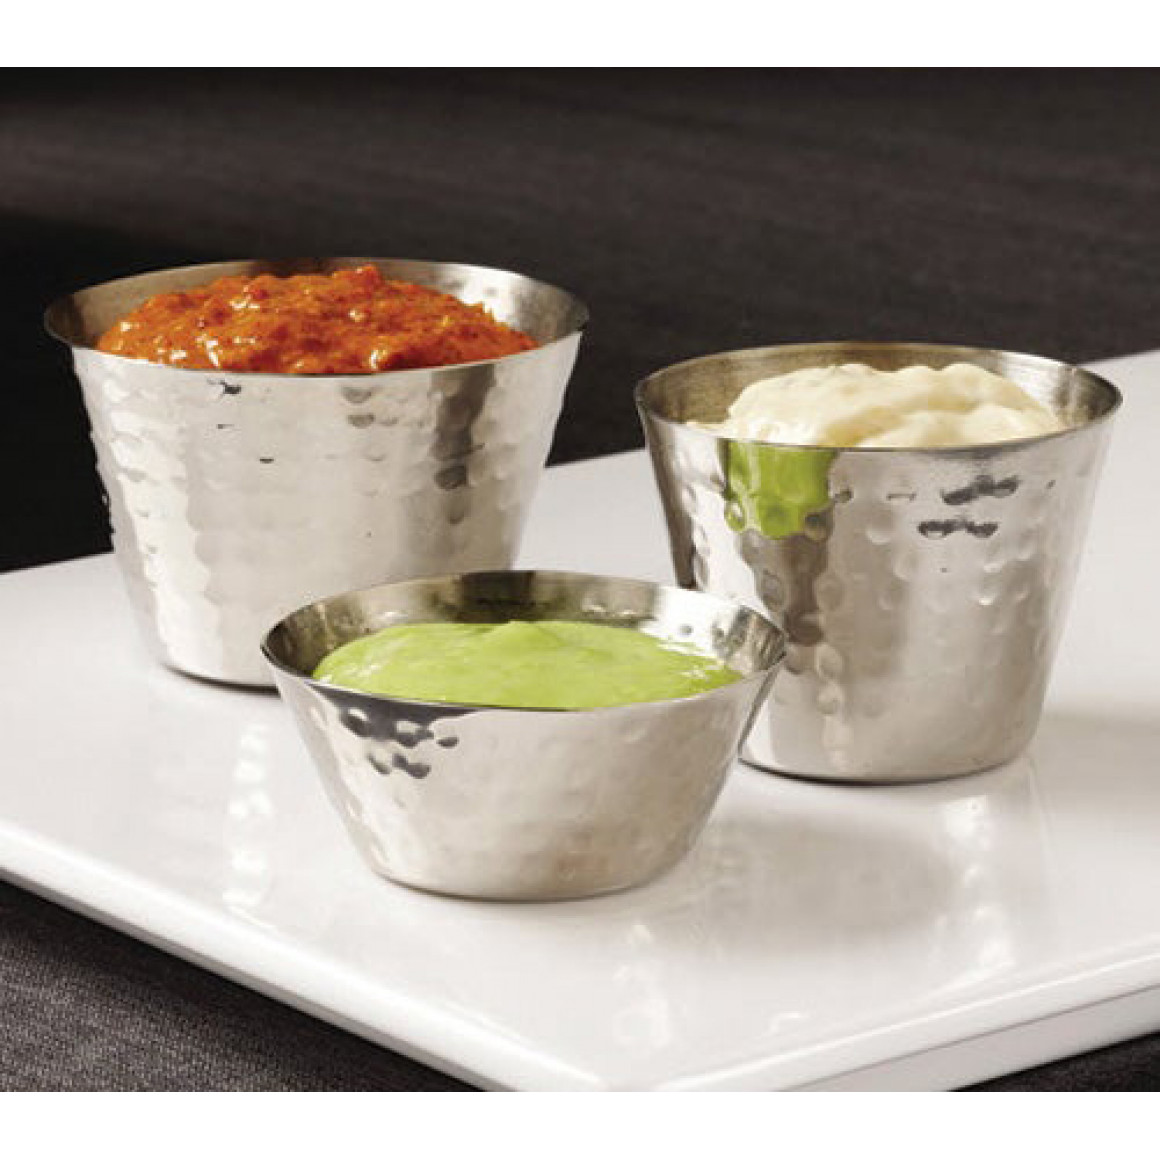 SAUCE CUP, STAINLESS STEEL, ROUND, HAMMERED, 4 OZ.